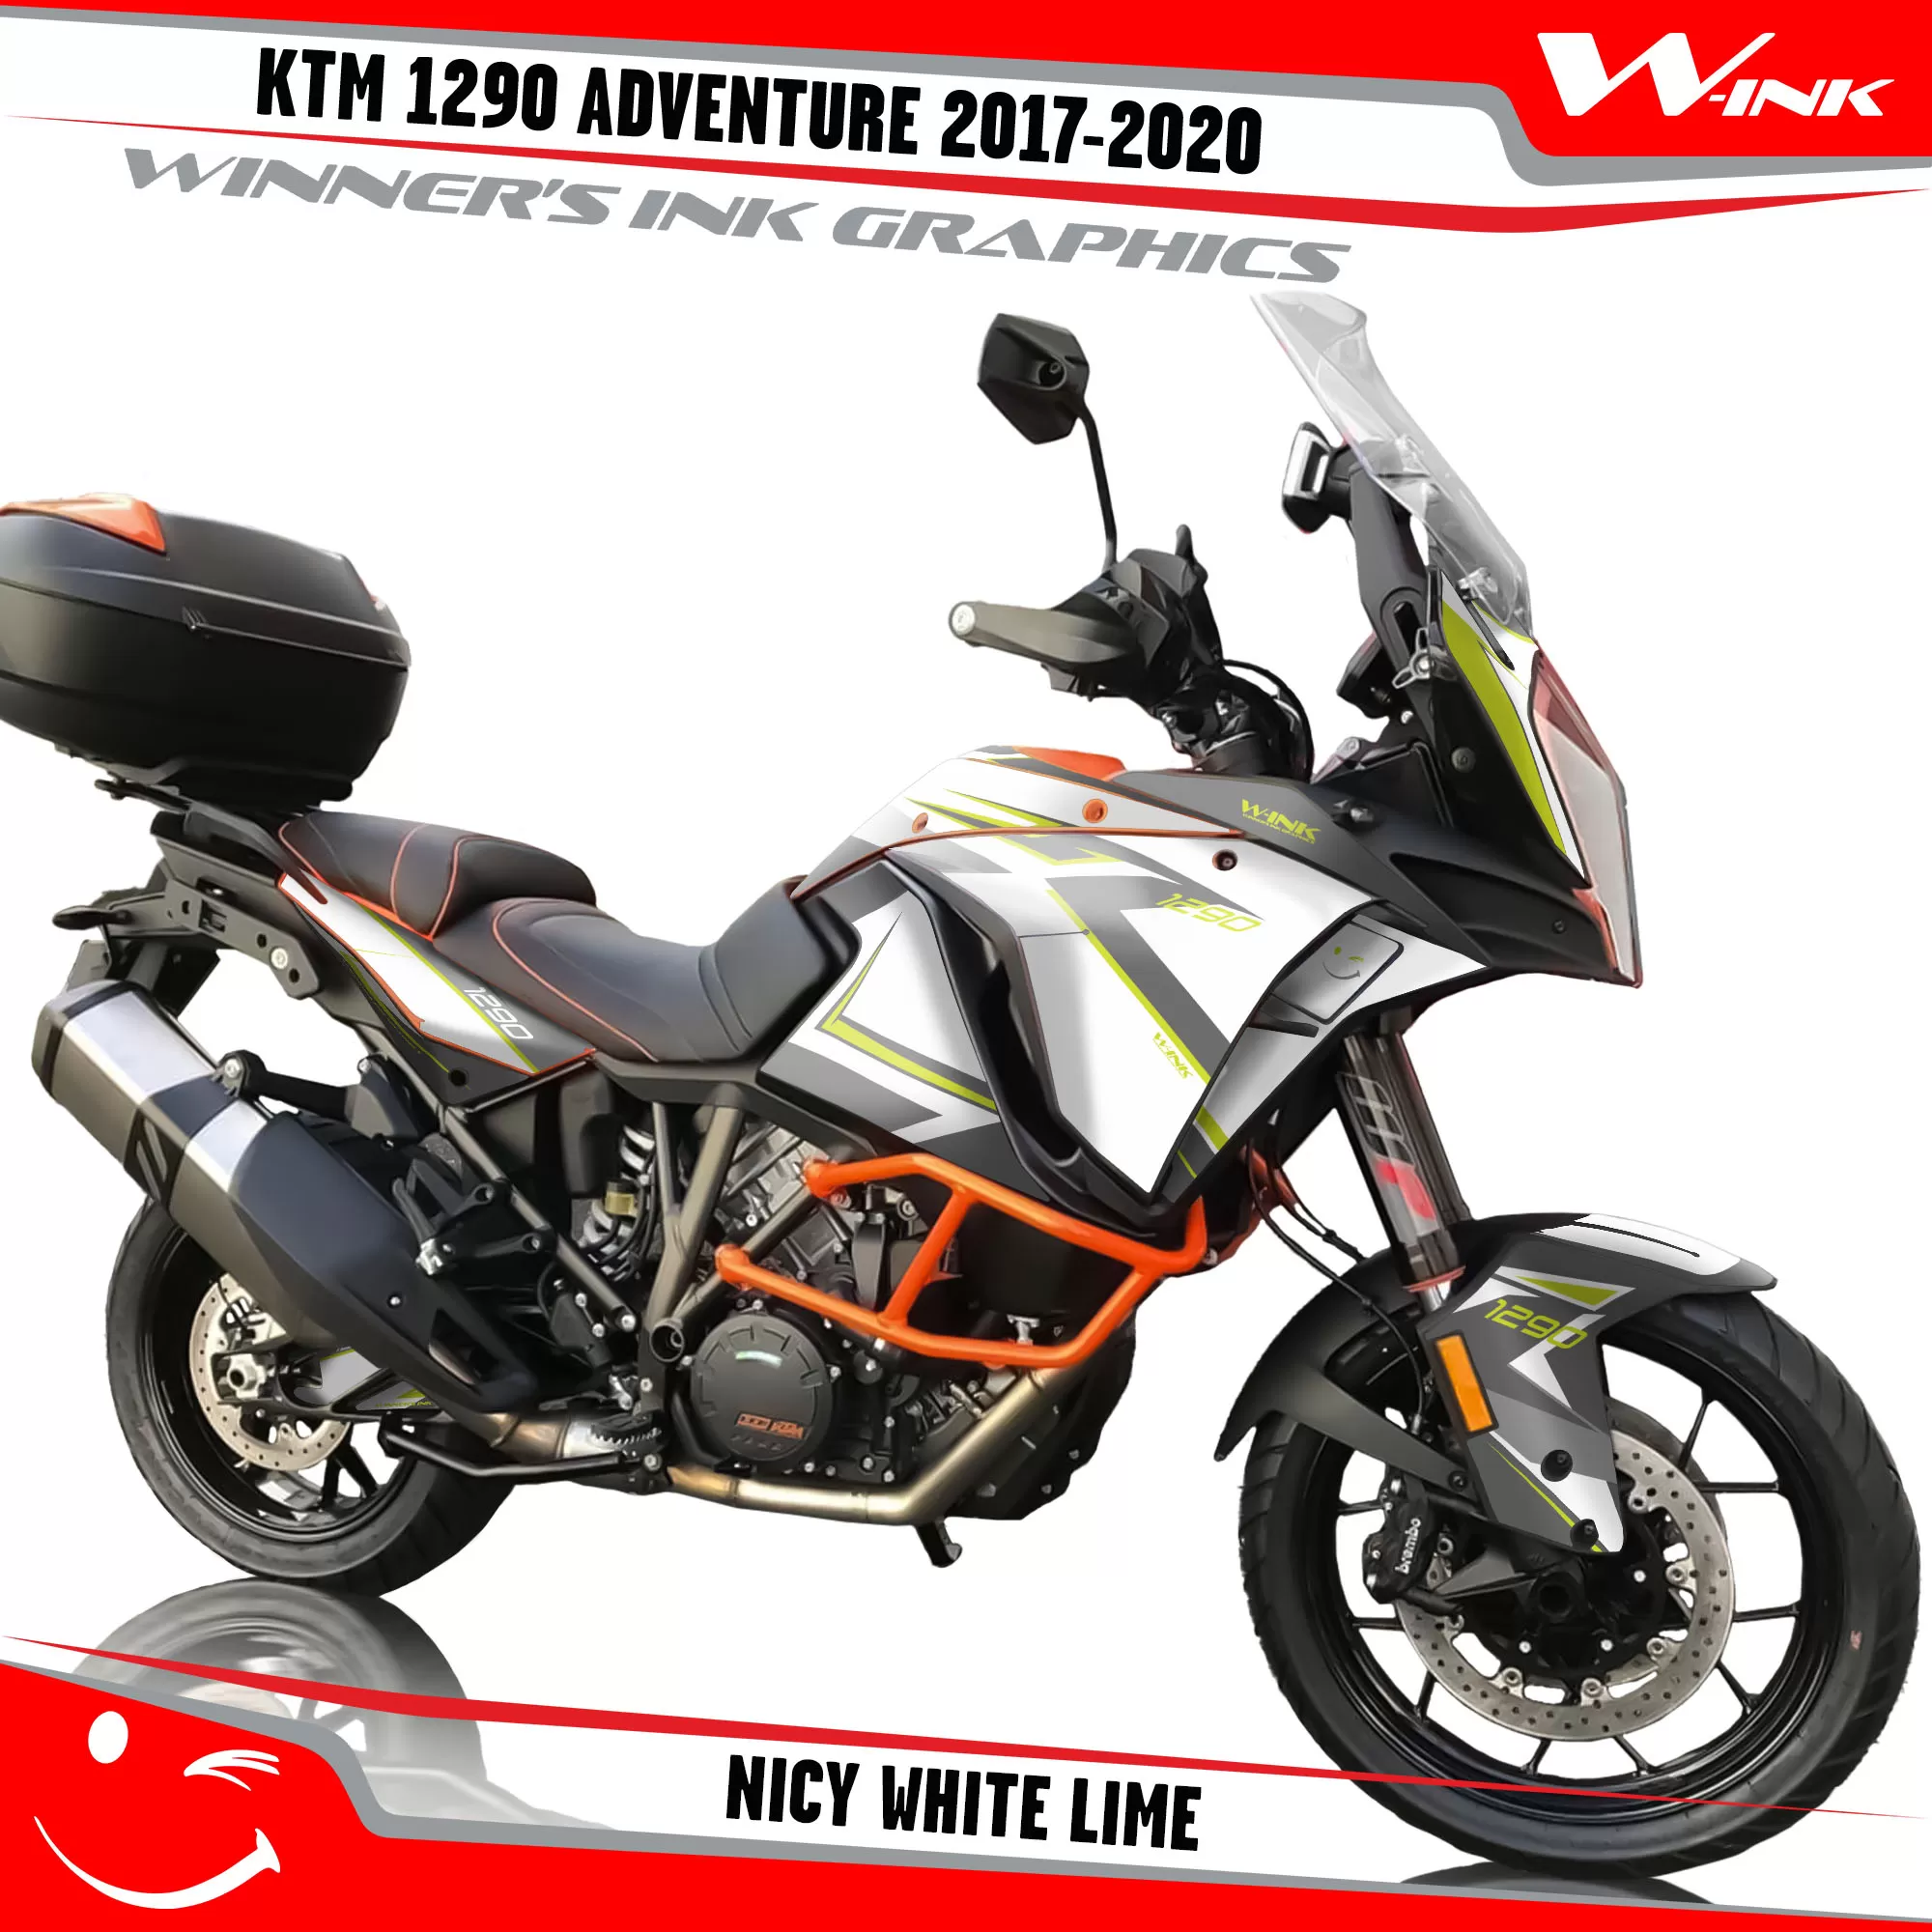 KTM-Adventure-1290-2017-2018-2019-2020-graphics-kit-and-decals-Nicy-White-Lime